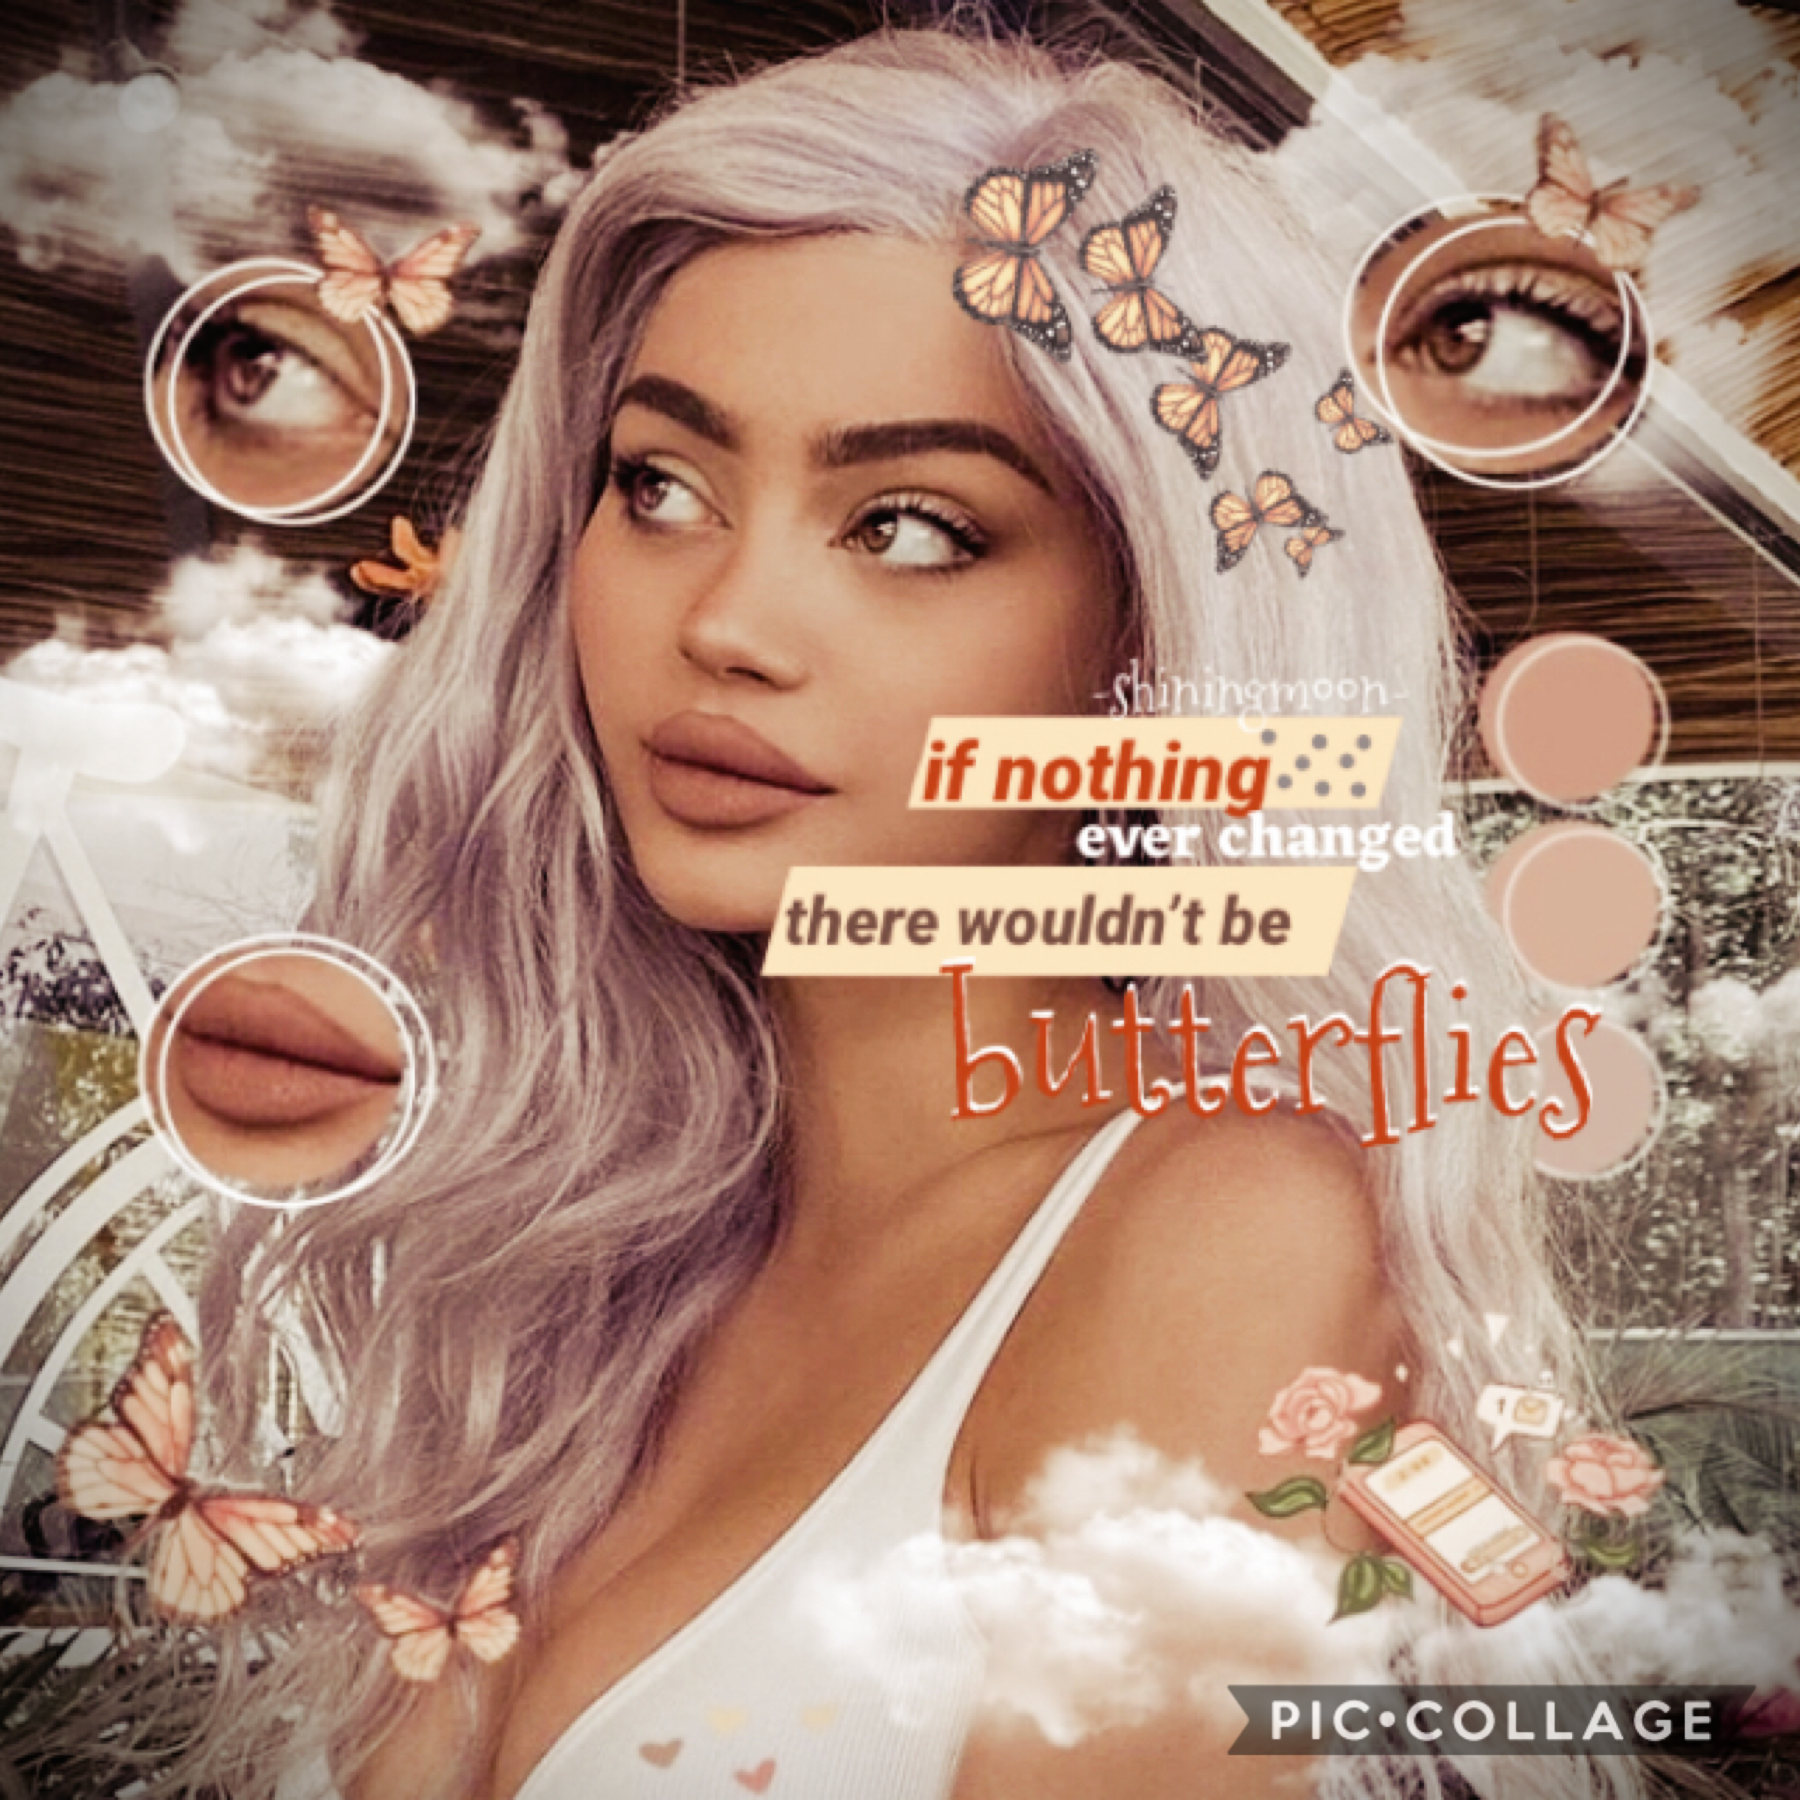 i’m in love with this edit 🥰 been missing you guys, sorry i haven’t been active. ❤️